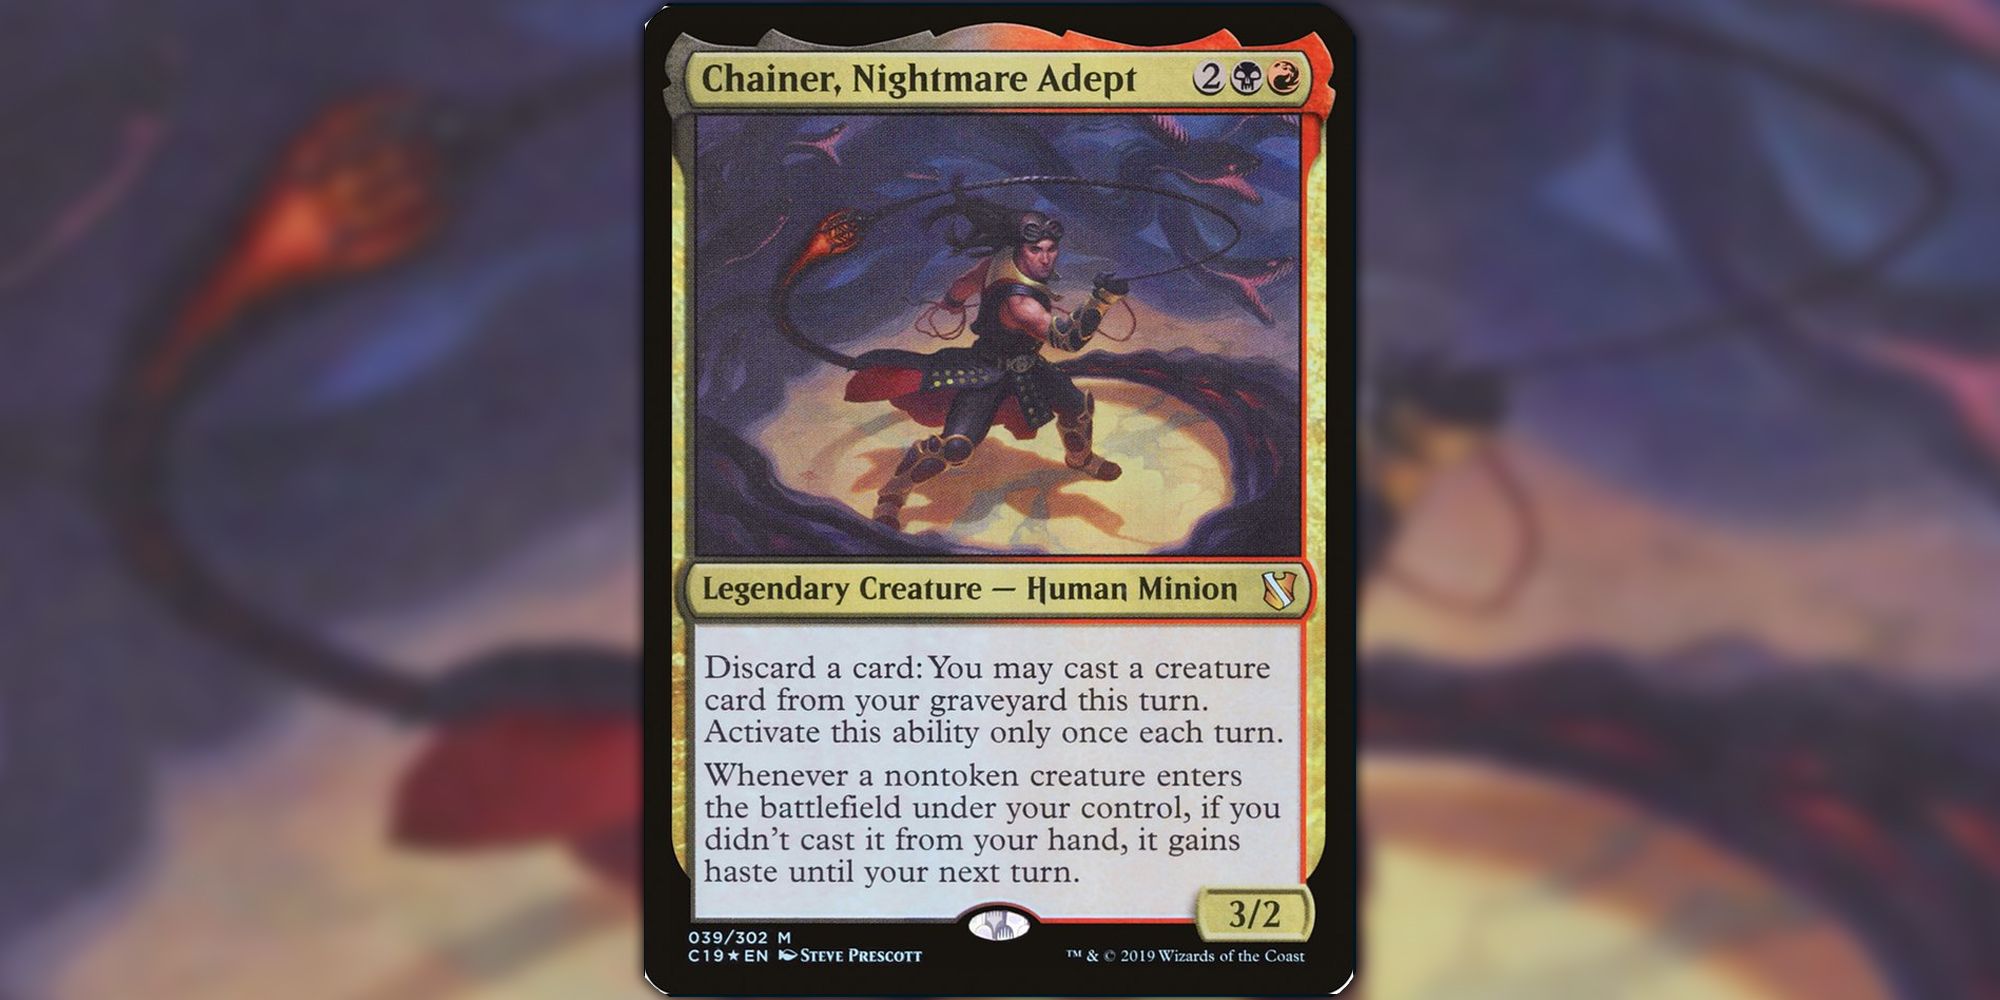 Chainer, Nightmare Adept from Magic The Gathering